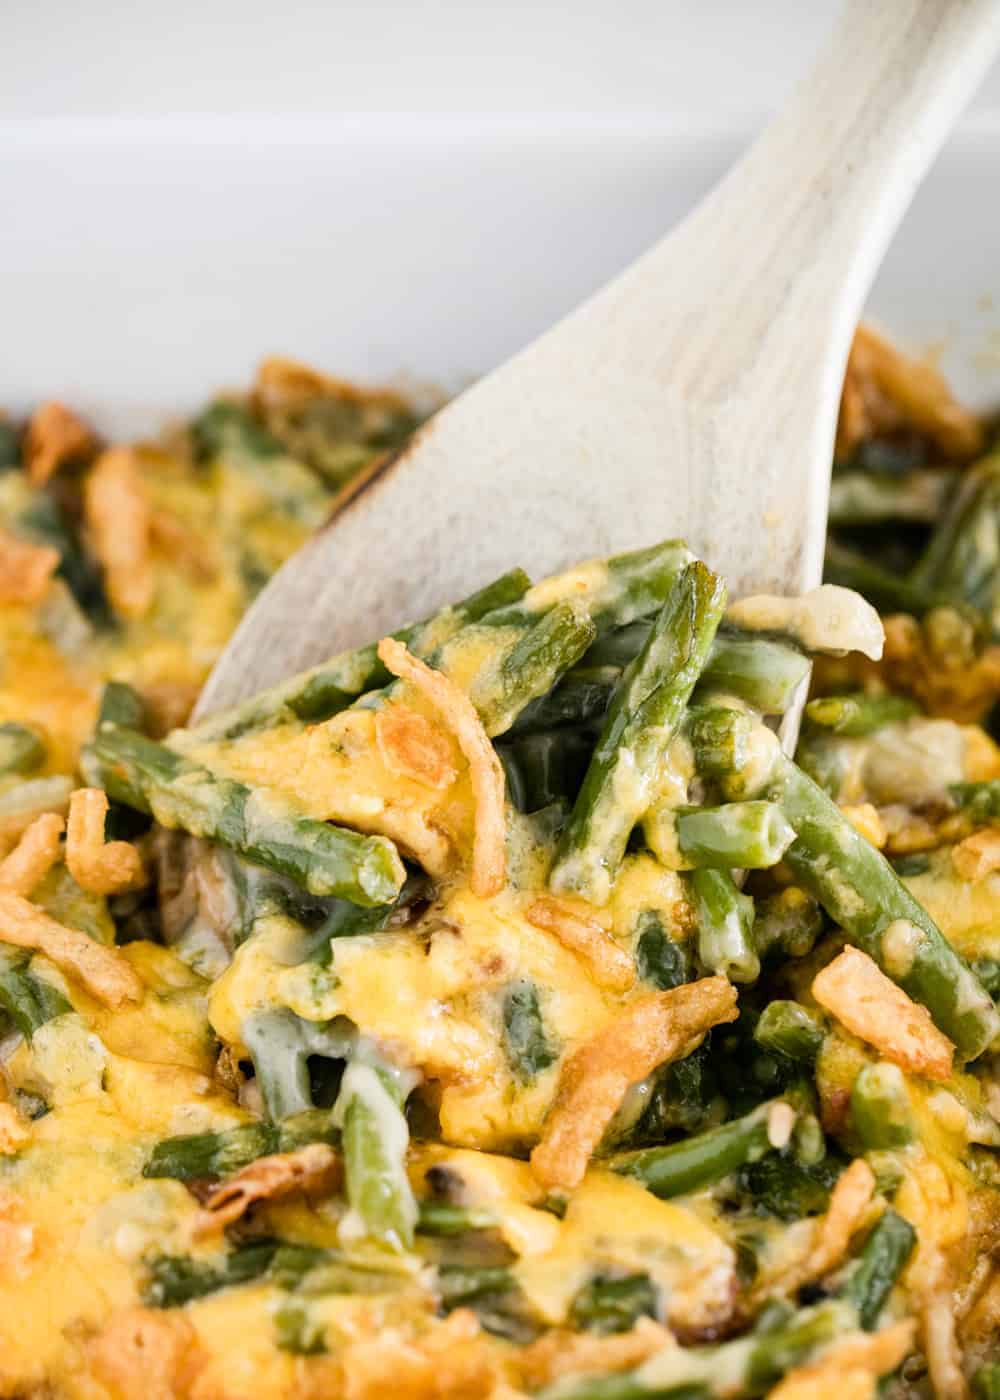 Green bean casserole served with wooden spoon.